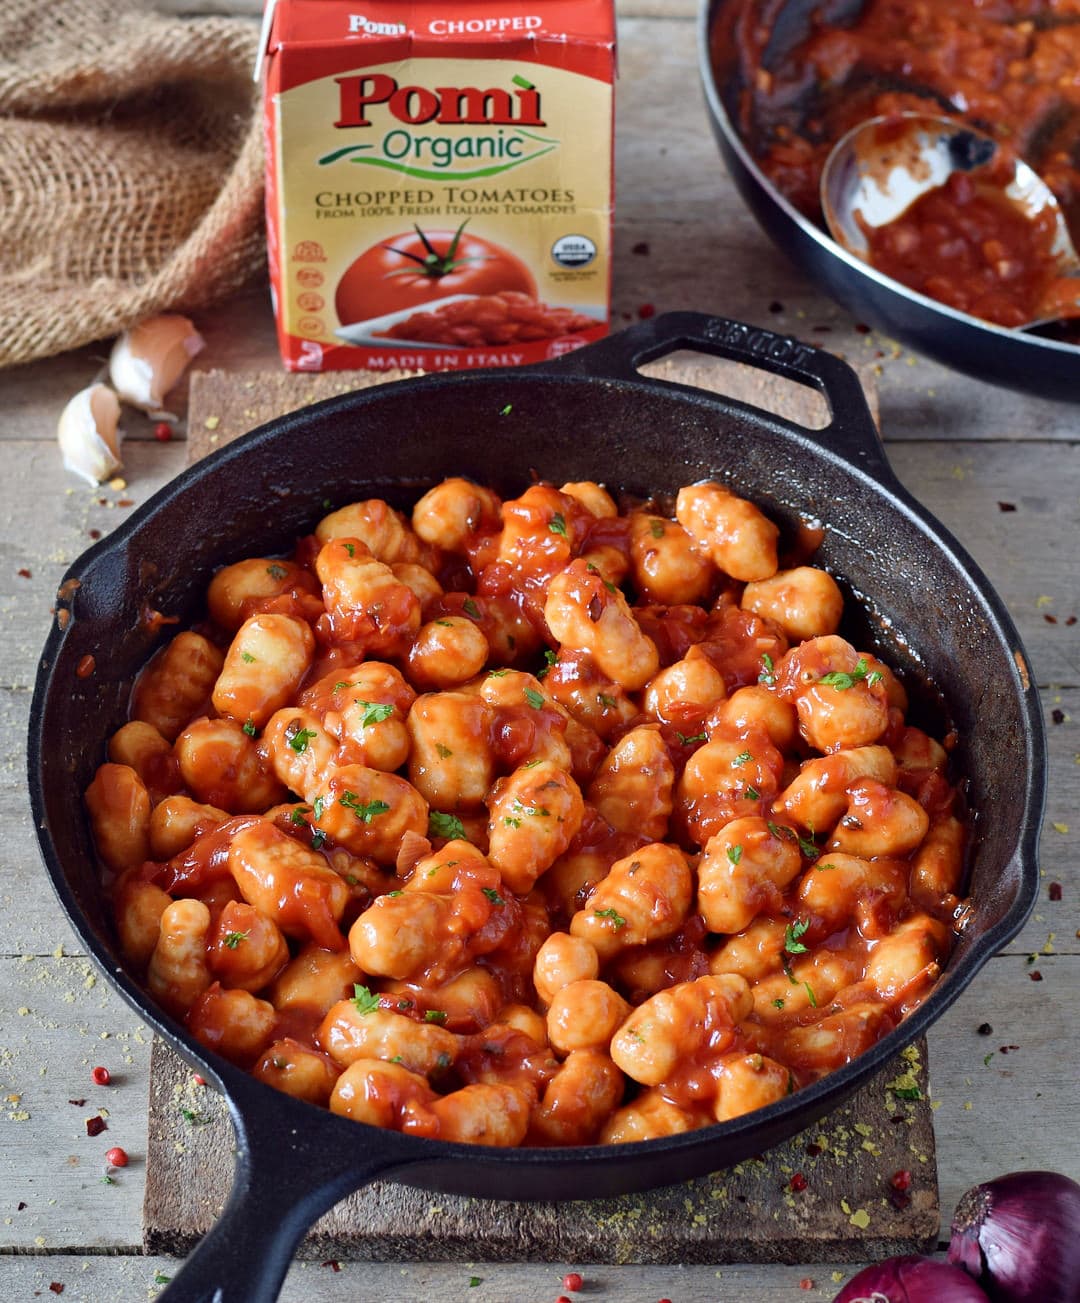 gnocchi all'arrabbiata in a pan with pomi chopped tomatoes